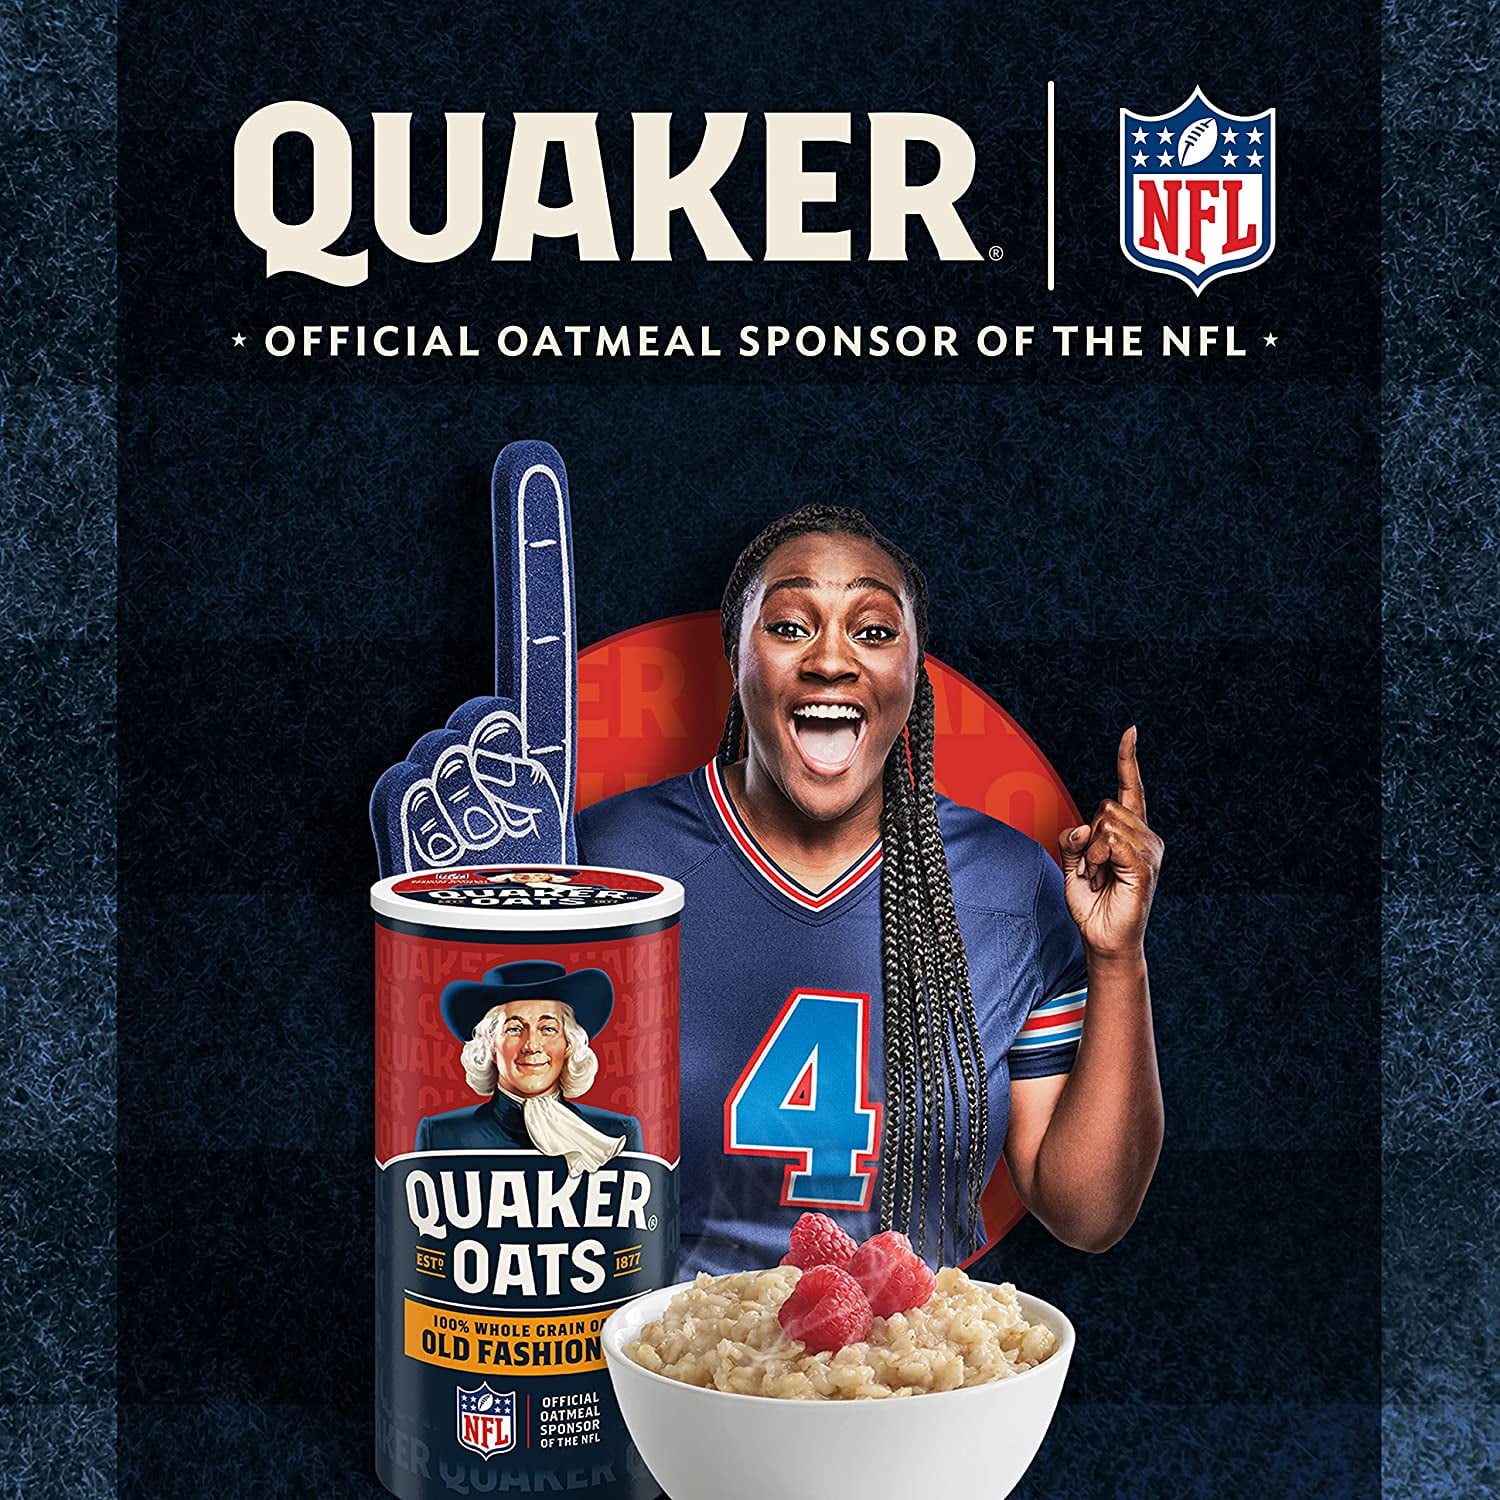 Quaker Oats As Low As $1.99 Per Canister At Kroger (Regular Price $6.79) -  iHeartKroger